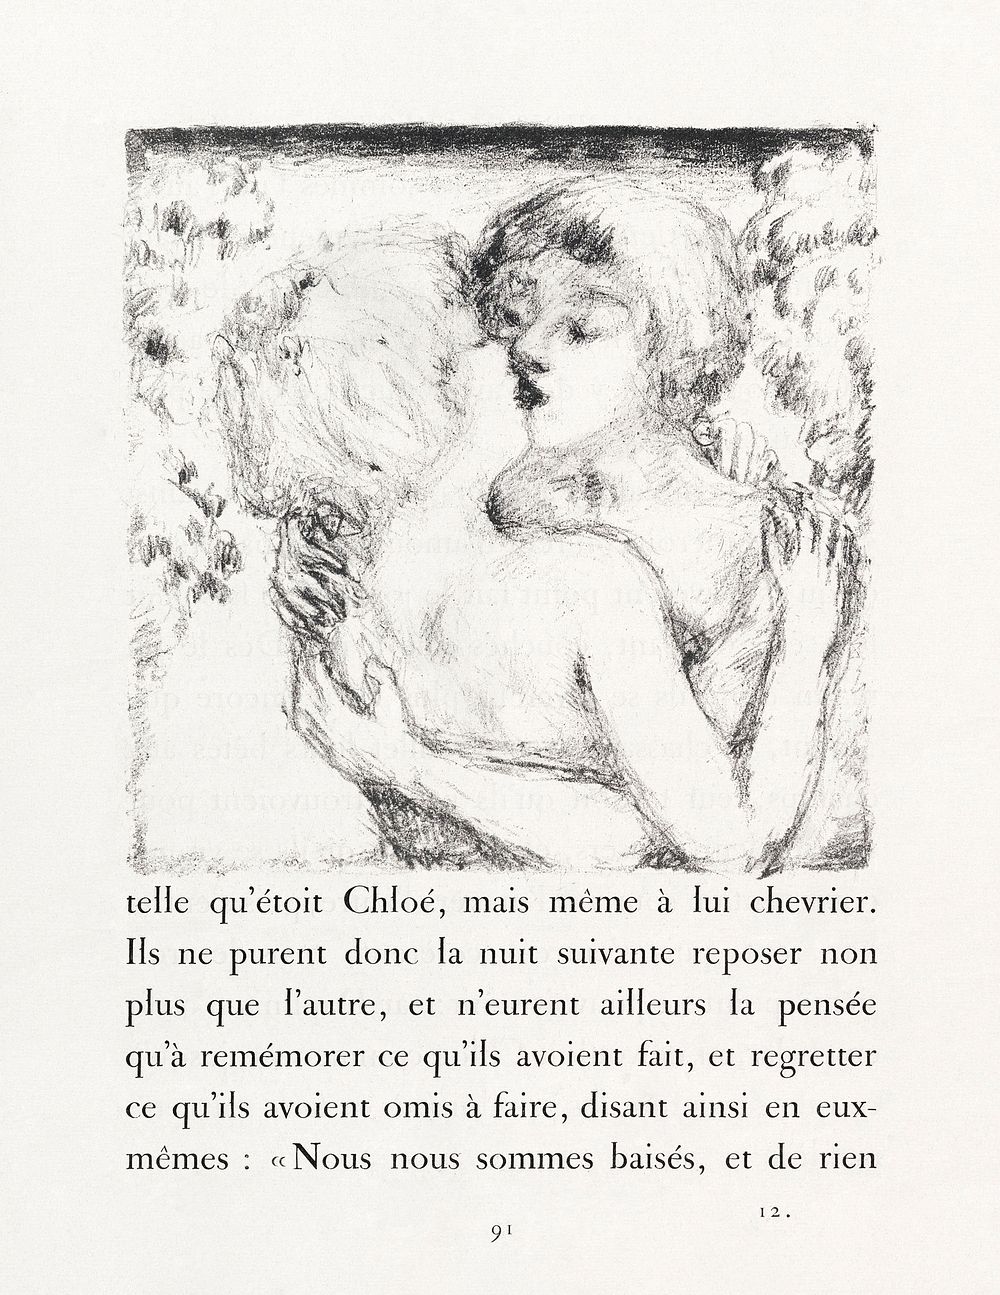 Couple Embracing, from "Daphnis and Chloe" by Longus (1902) print in high resolution by Pierre Bonnard. Original from The…